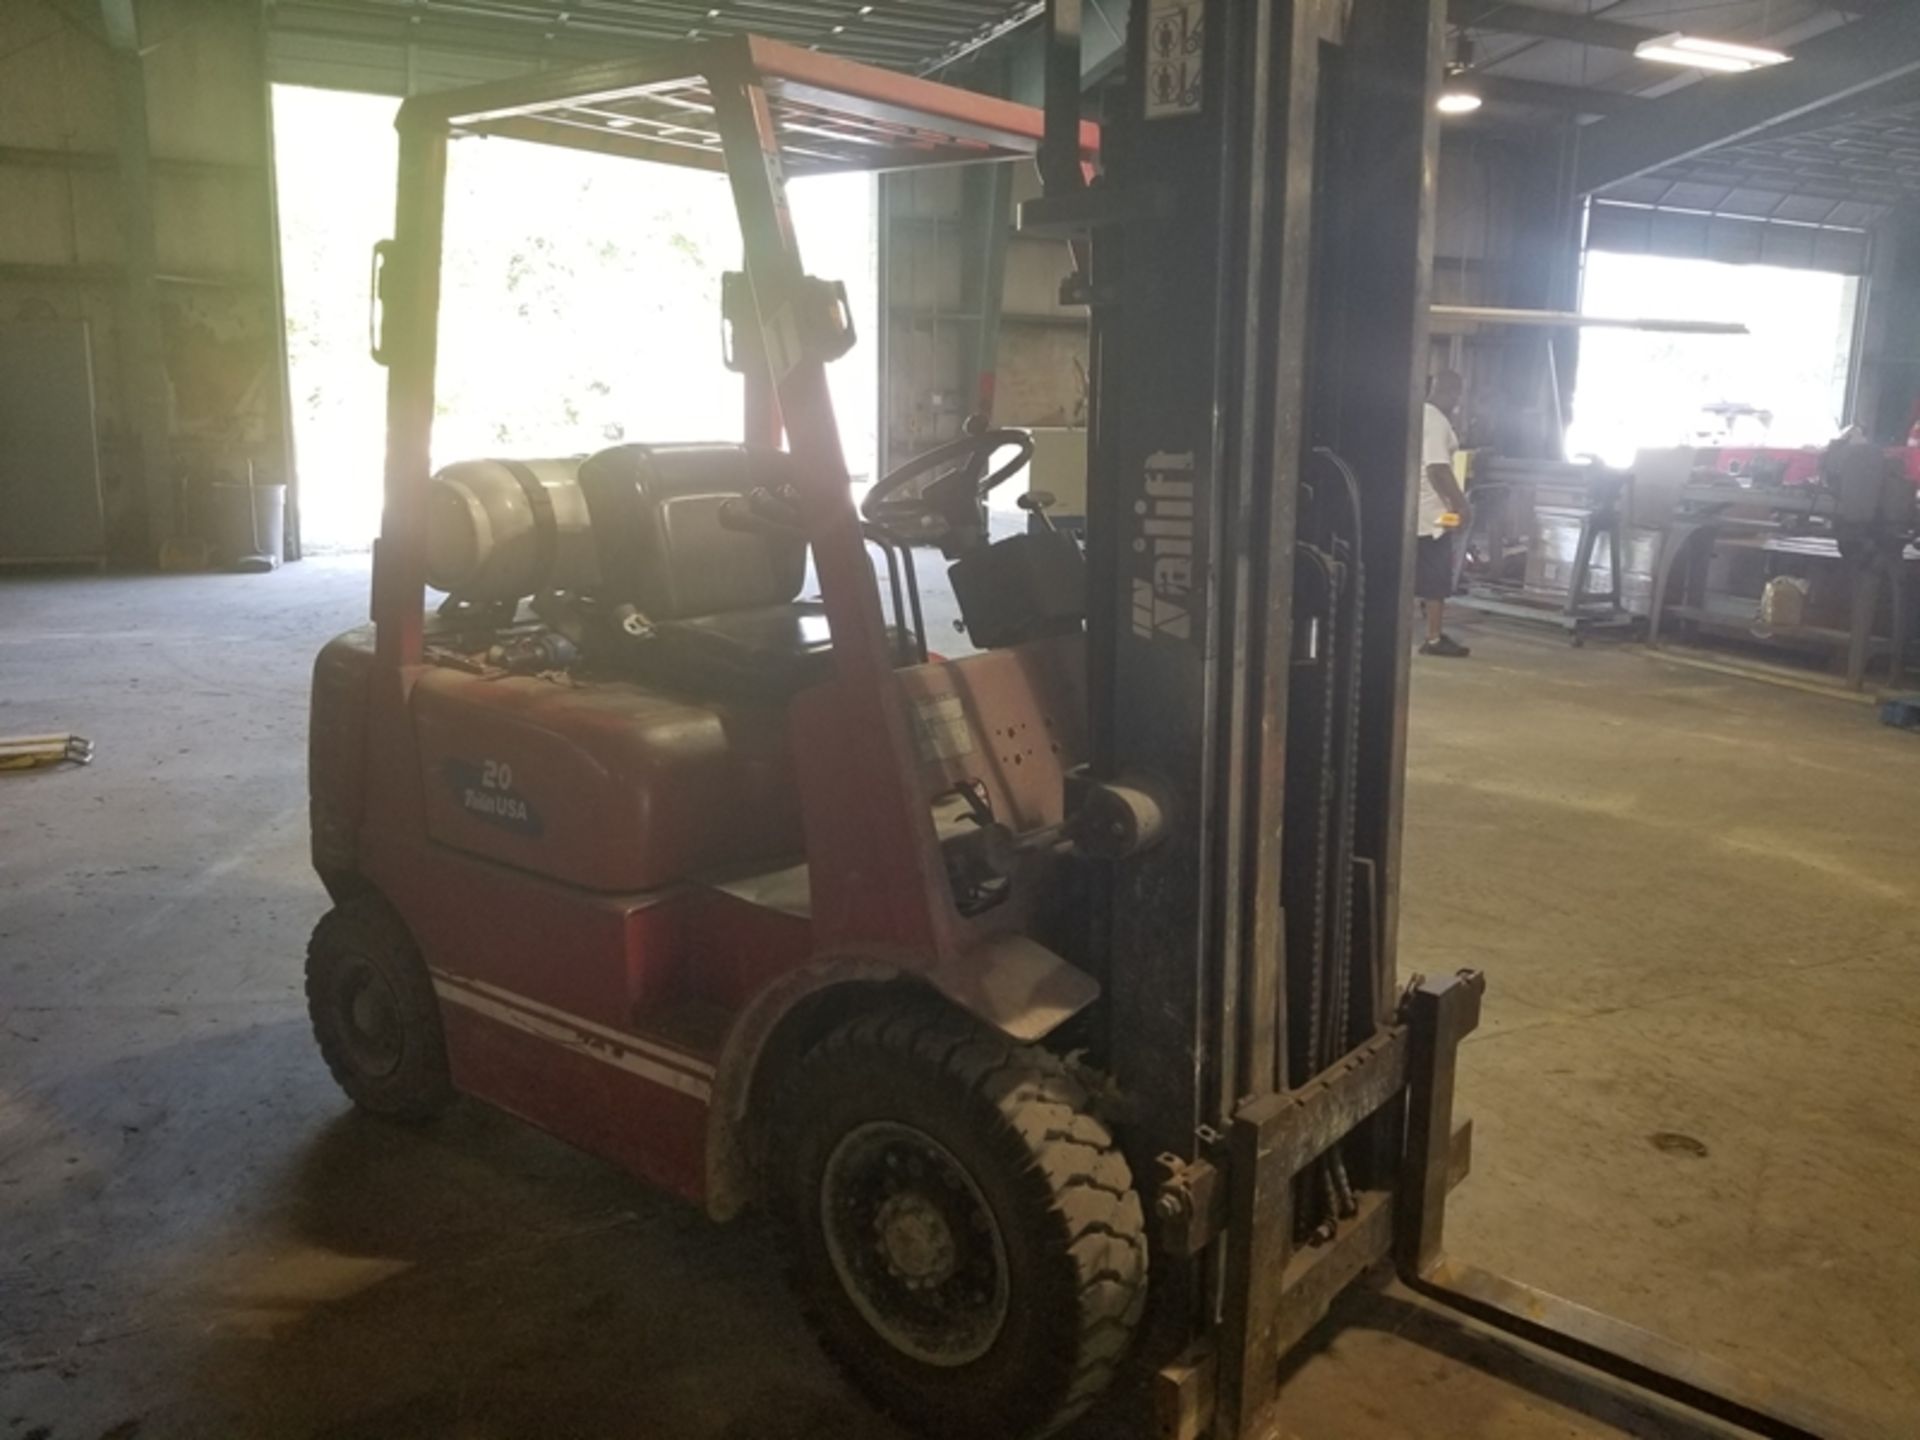 TAILIFT 20 forklift LP gas, semi-pneumatic tire - Image 4 of 7